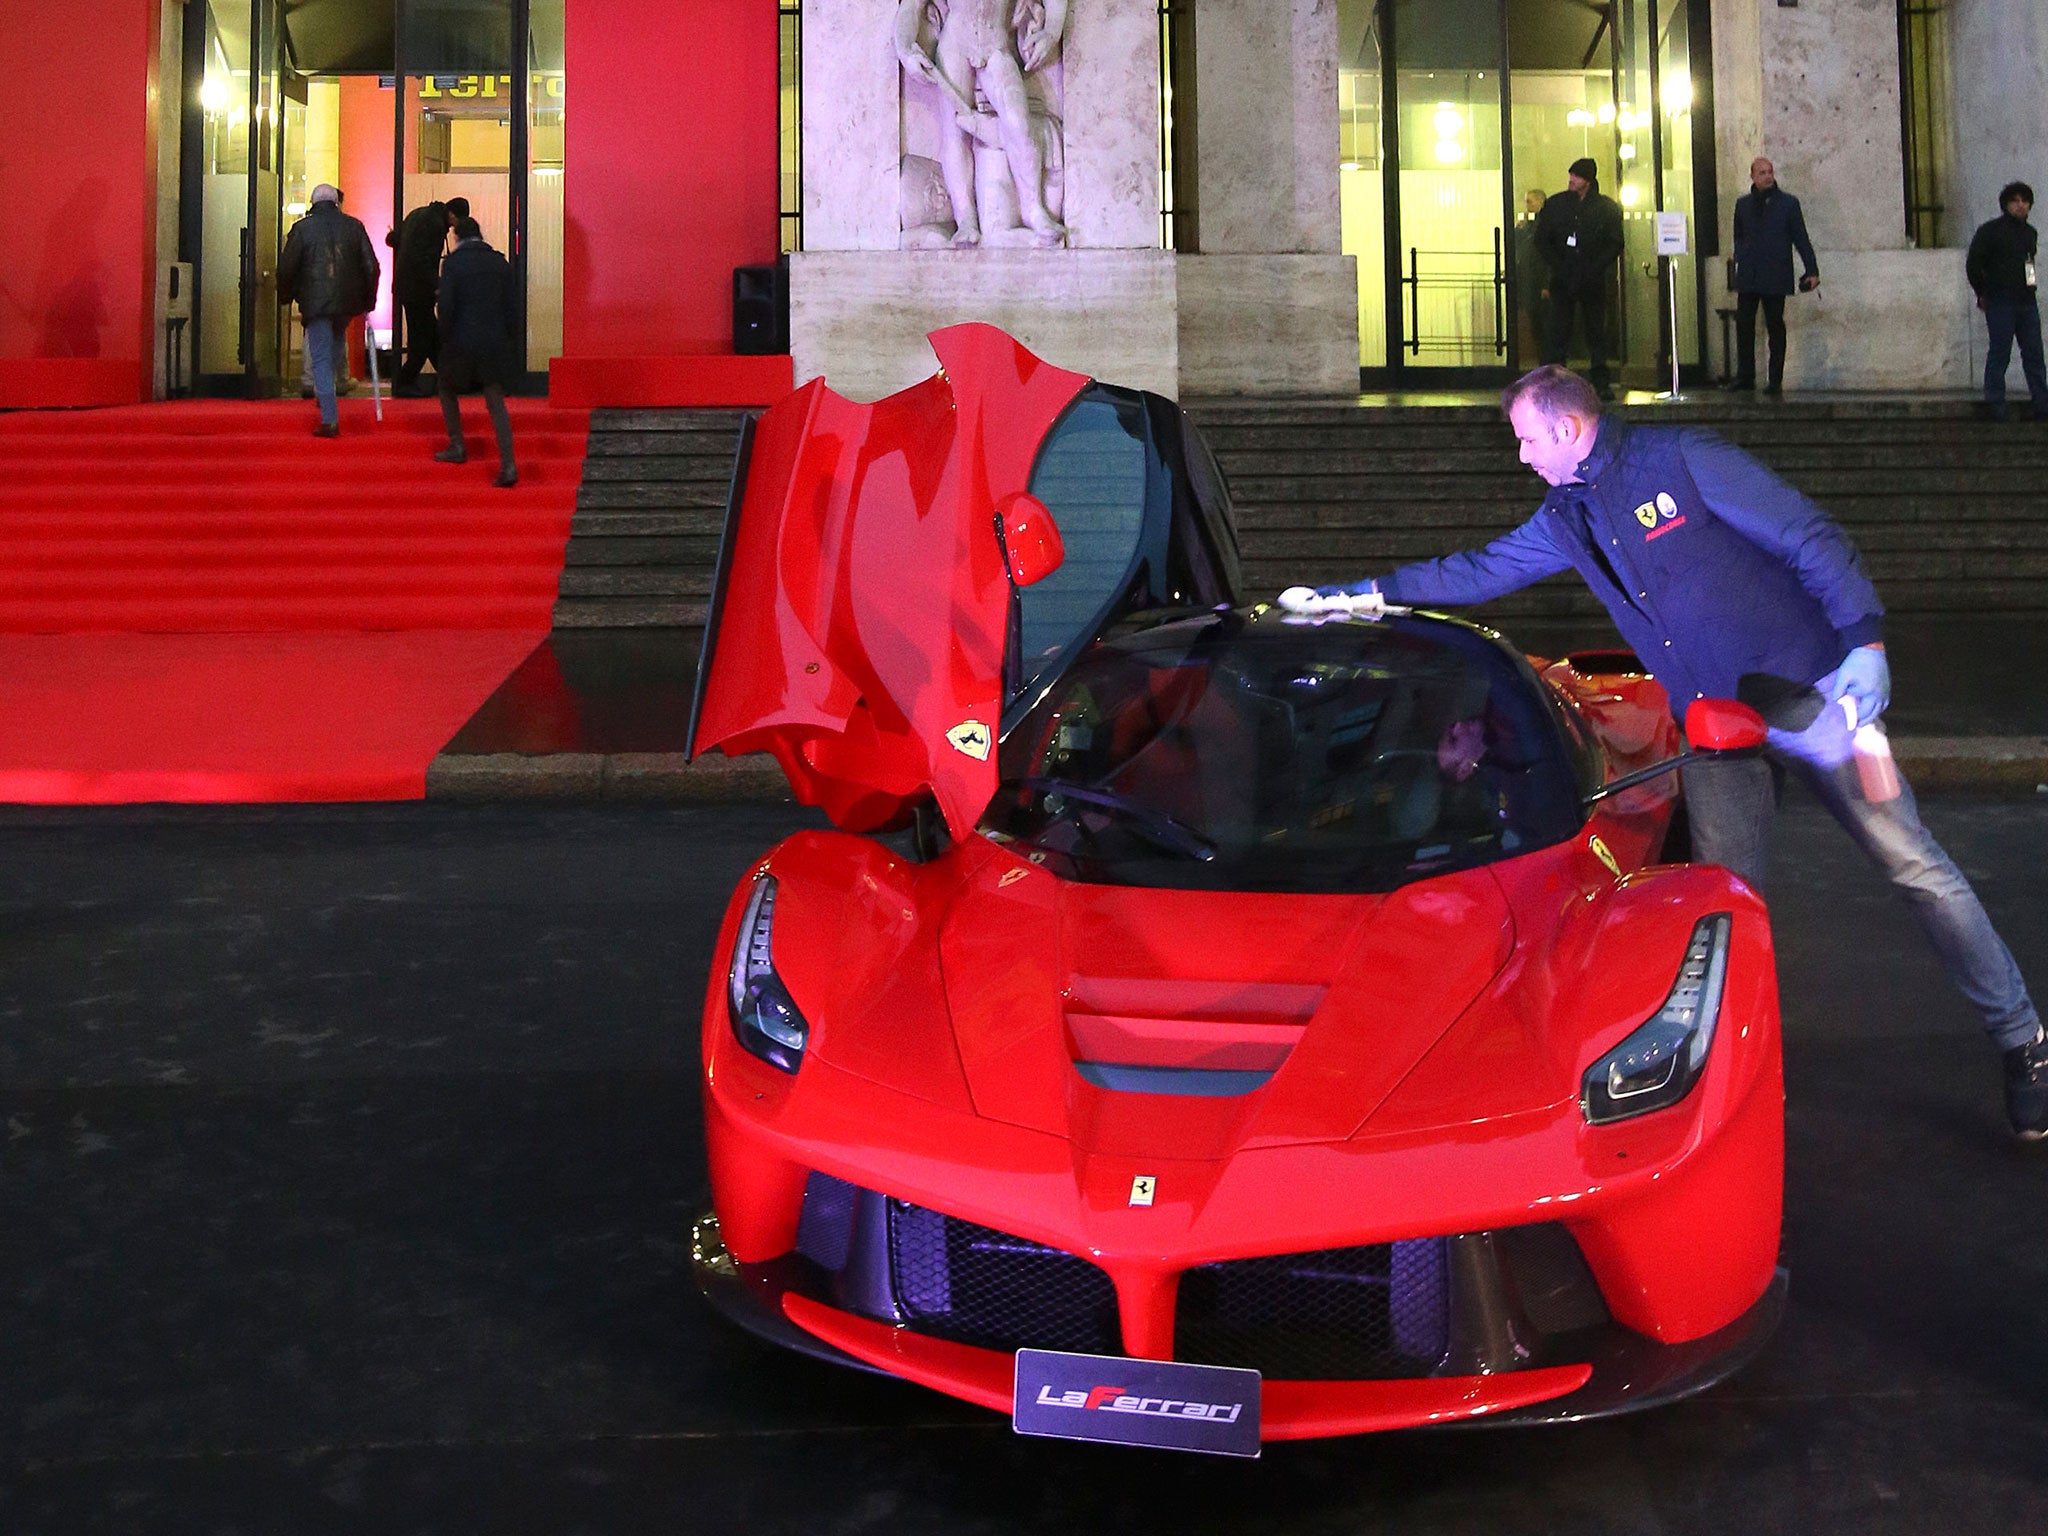 The famous red and yellow of Ferrari dominates the front of Milan’s stock exchange